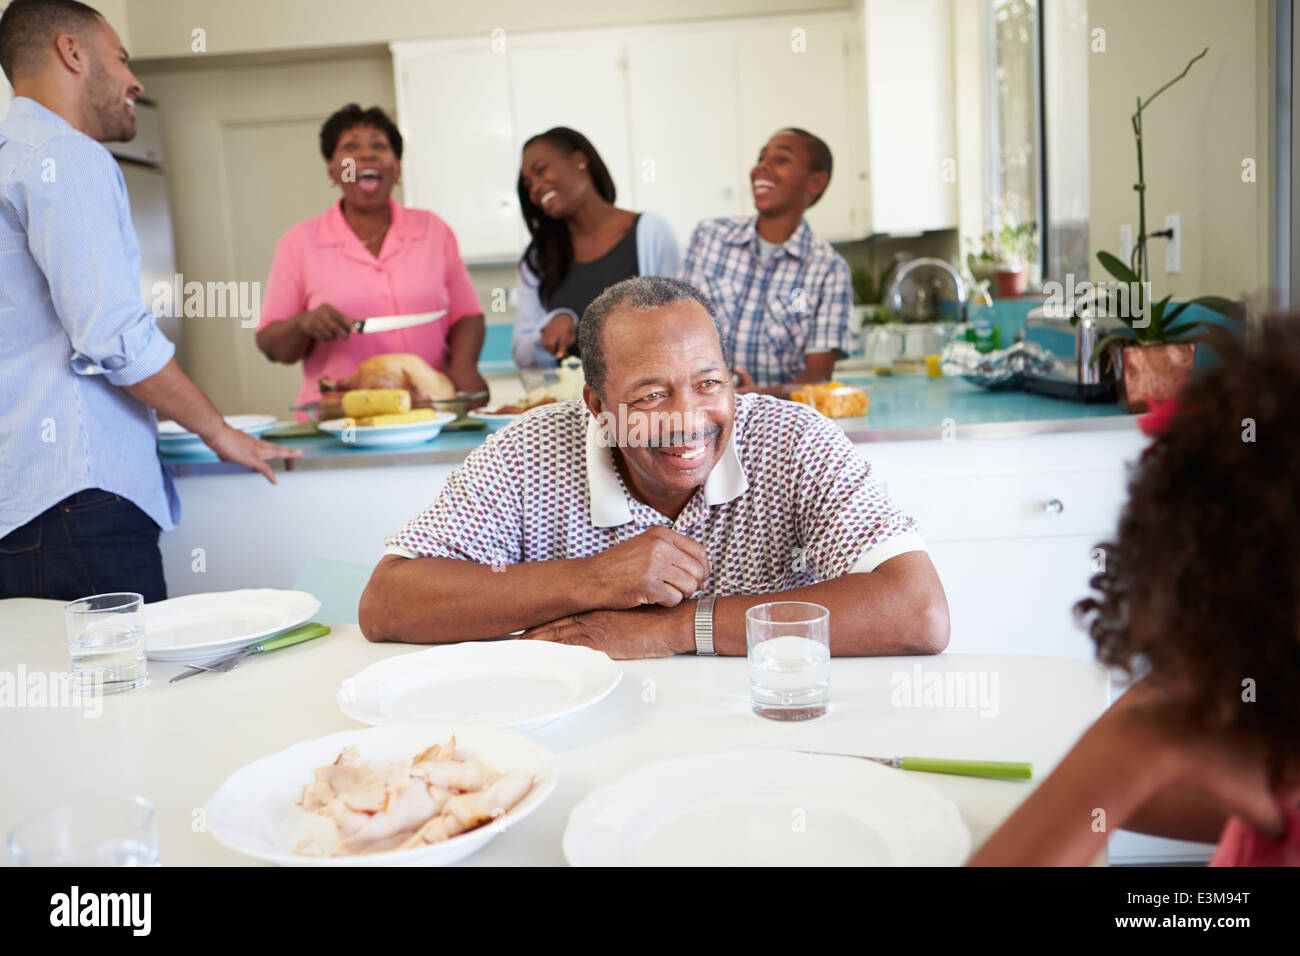 Multi-Generation Family Preparing For Meal At Home Stock Photo